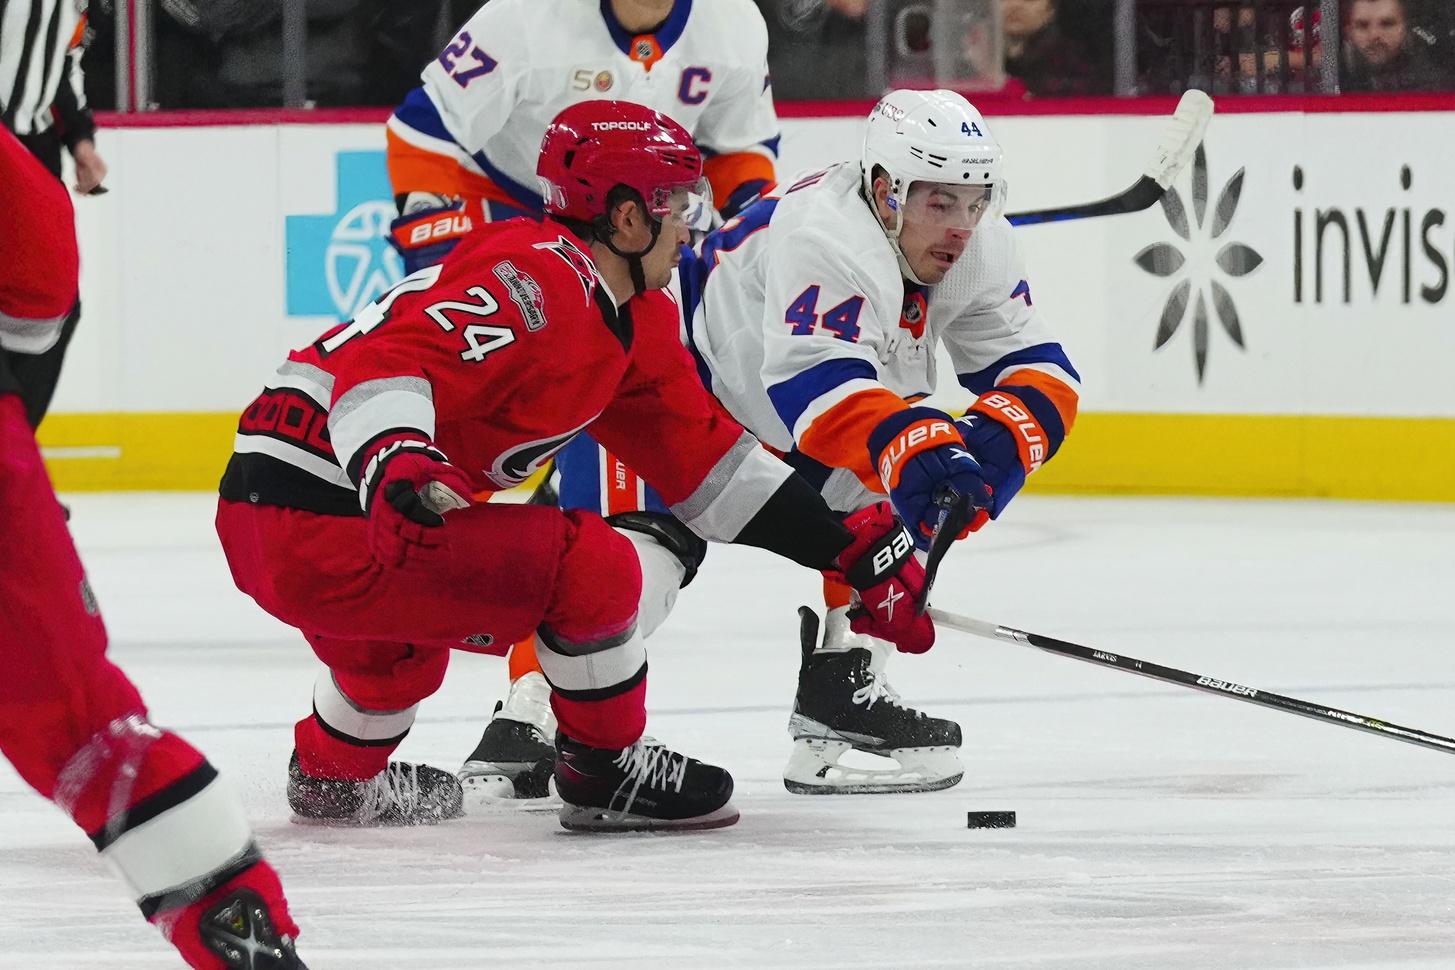 New York Islanders center Jean-Gabriel Pageau (44) and Carolina Hurricanes center Seth Jarvis (24) battle over the puck during the second period in game two of the first round of the 2023 Stanley Cup Playoffs at PNC Arena. / James Guillory-USA TODAY Sports